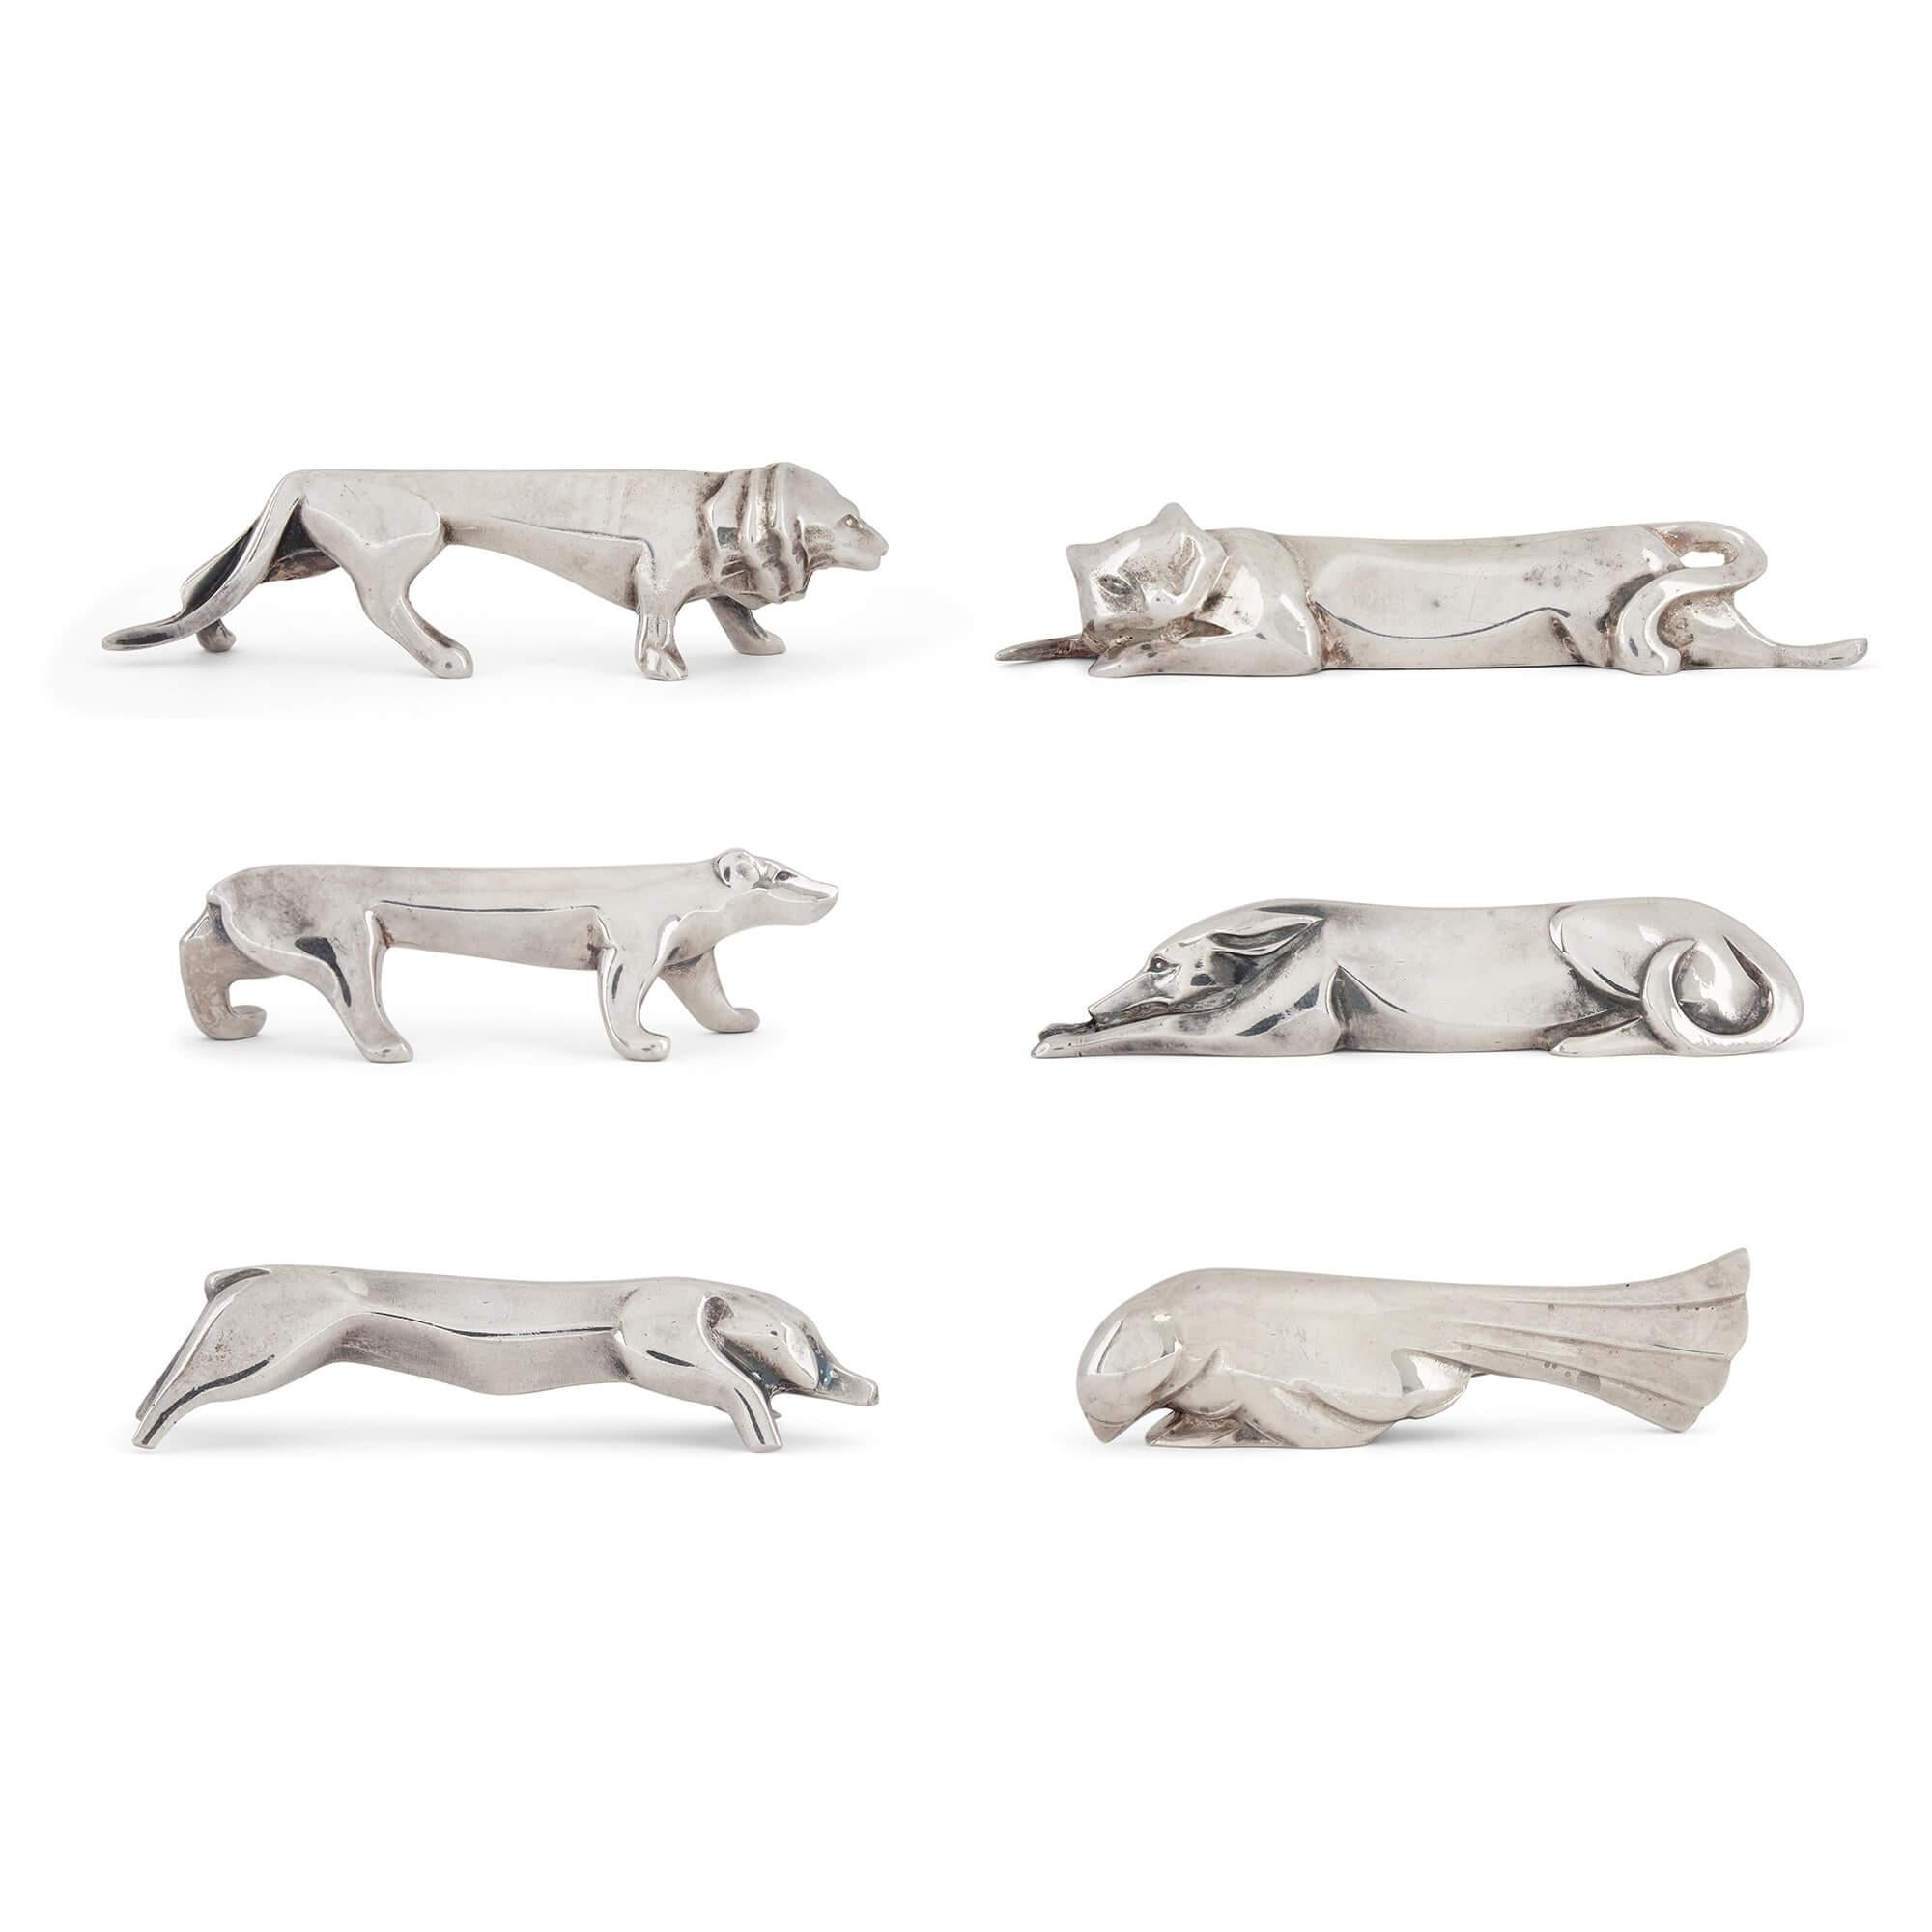 Set of twelve plated silver animalier knife rests by Christofle
French, c. 1930
Bird: height 2cm, width 8cm, depth 2cm
Case: height 4.5cm, width 28cm, depth 32cm

This charming set of knife rests was designed by the Swiss artist Edouard Sandoz